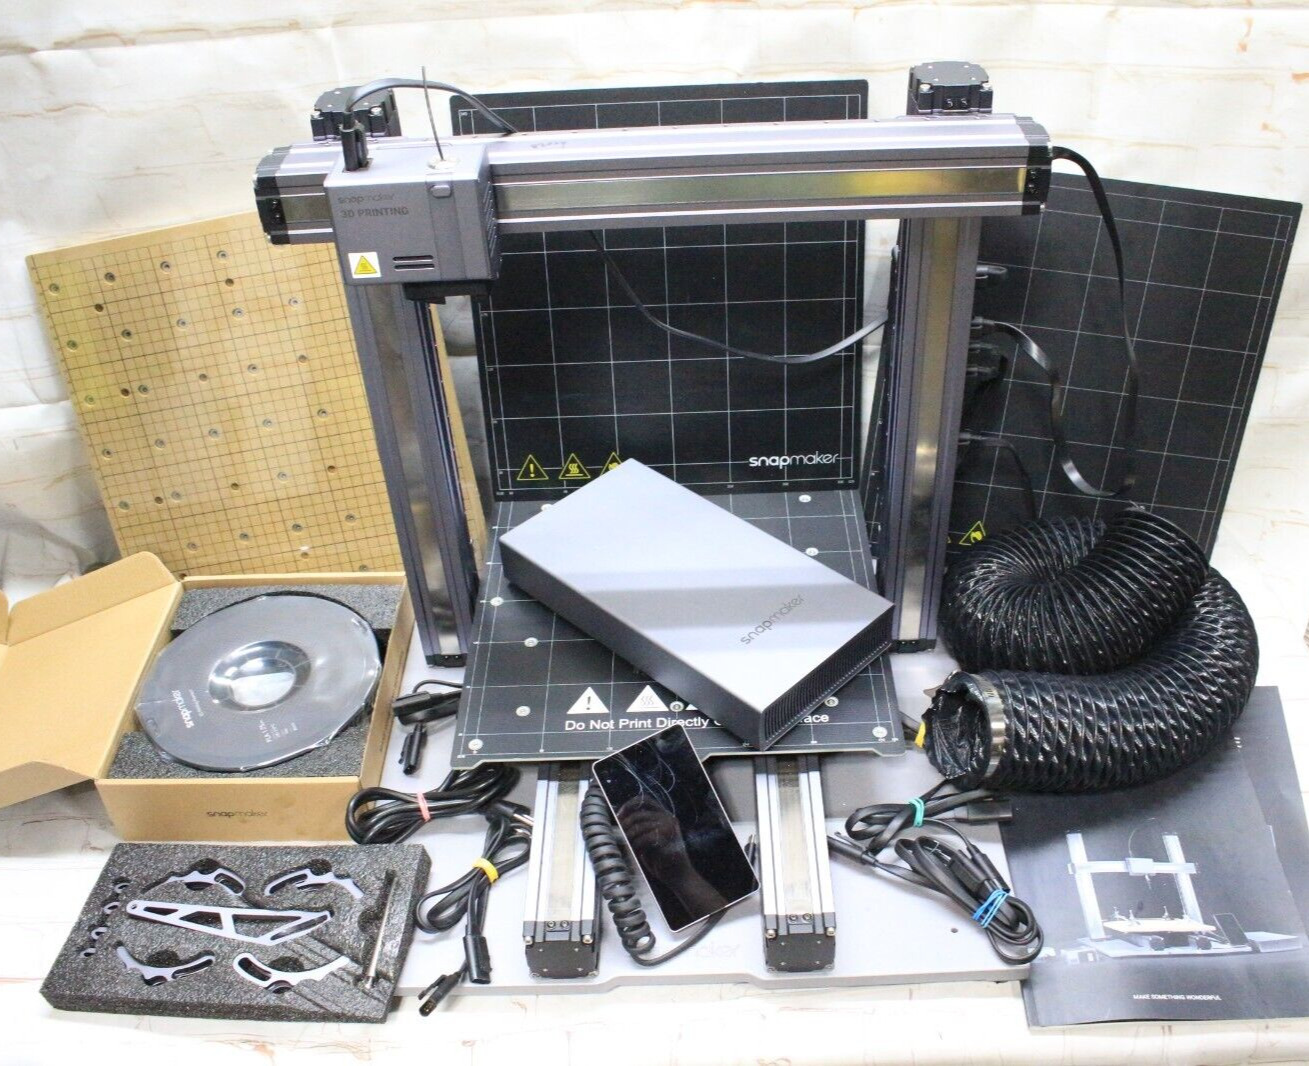 Snapmaker 2.0 A350 3-in-1 3D printer / Laser engraver / CNC mill With Extras